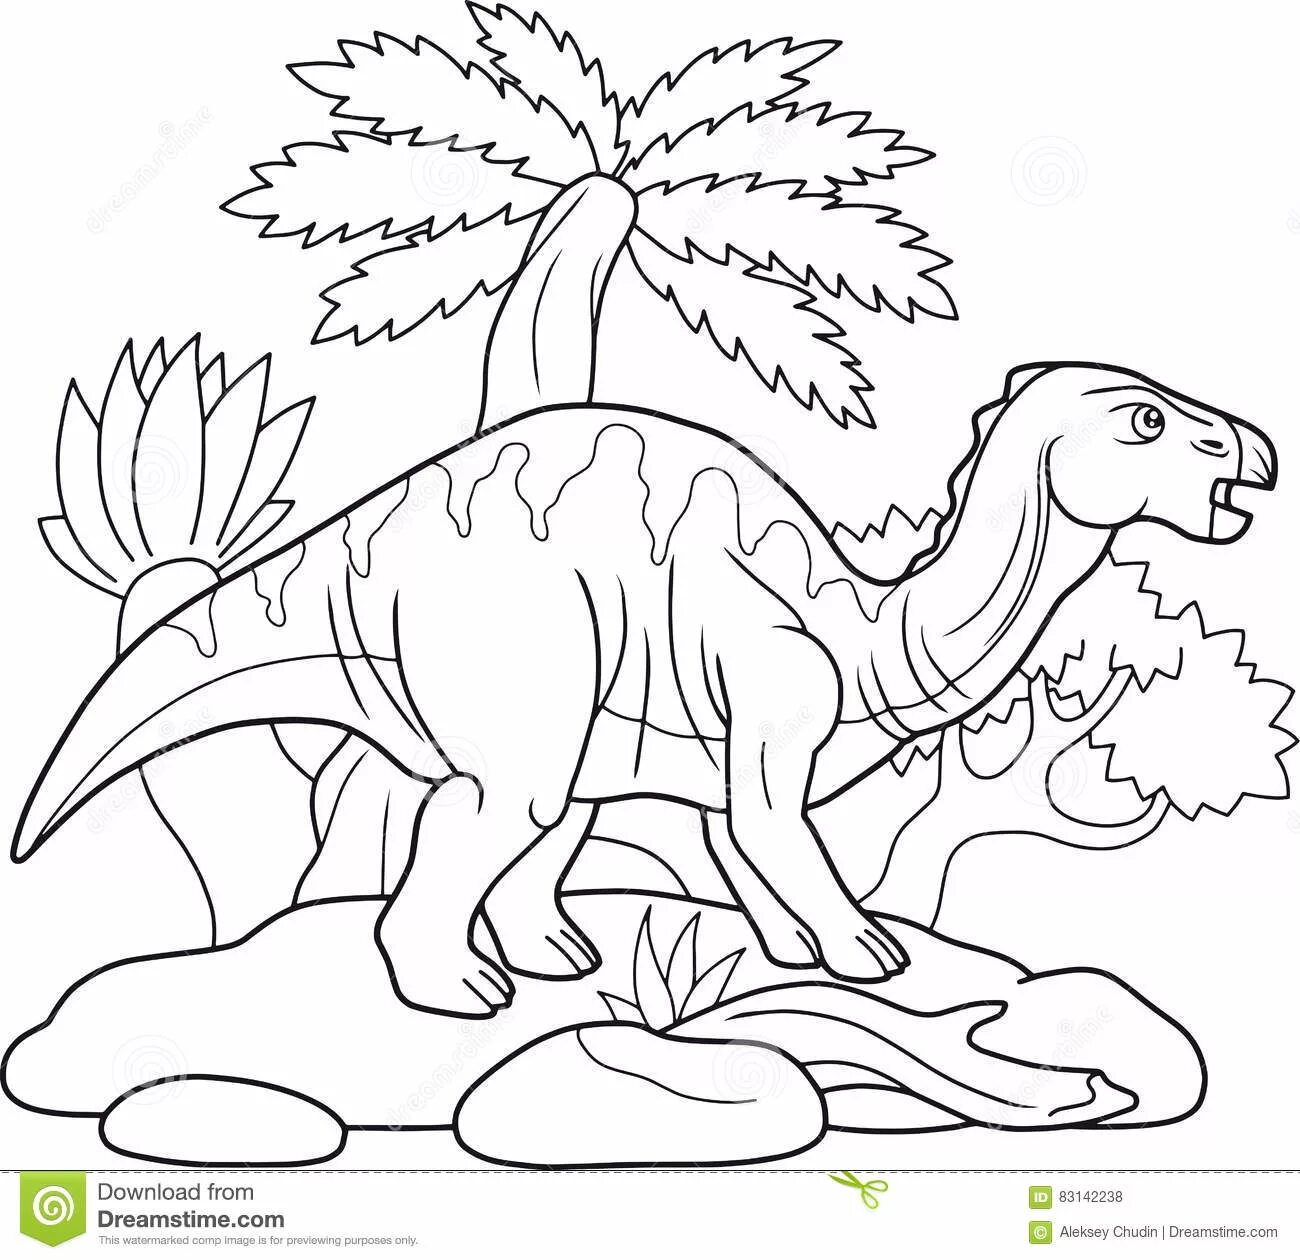 Intricate iguanodon coloring page